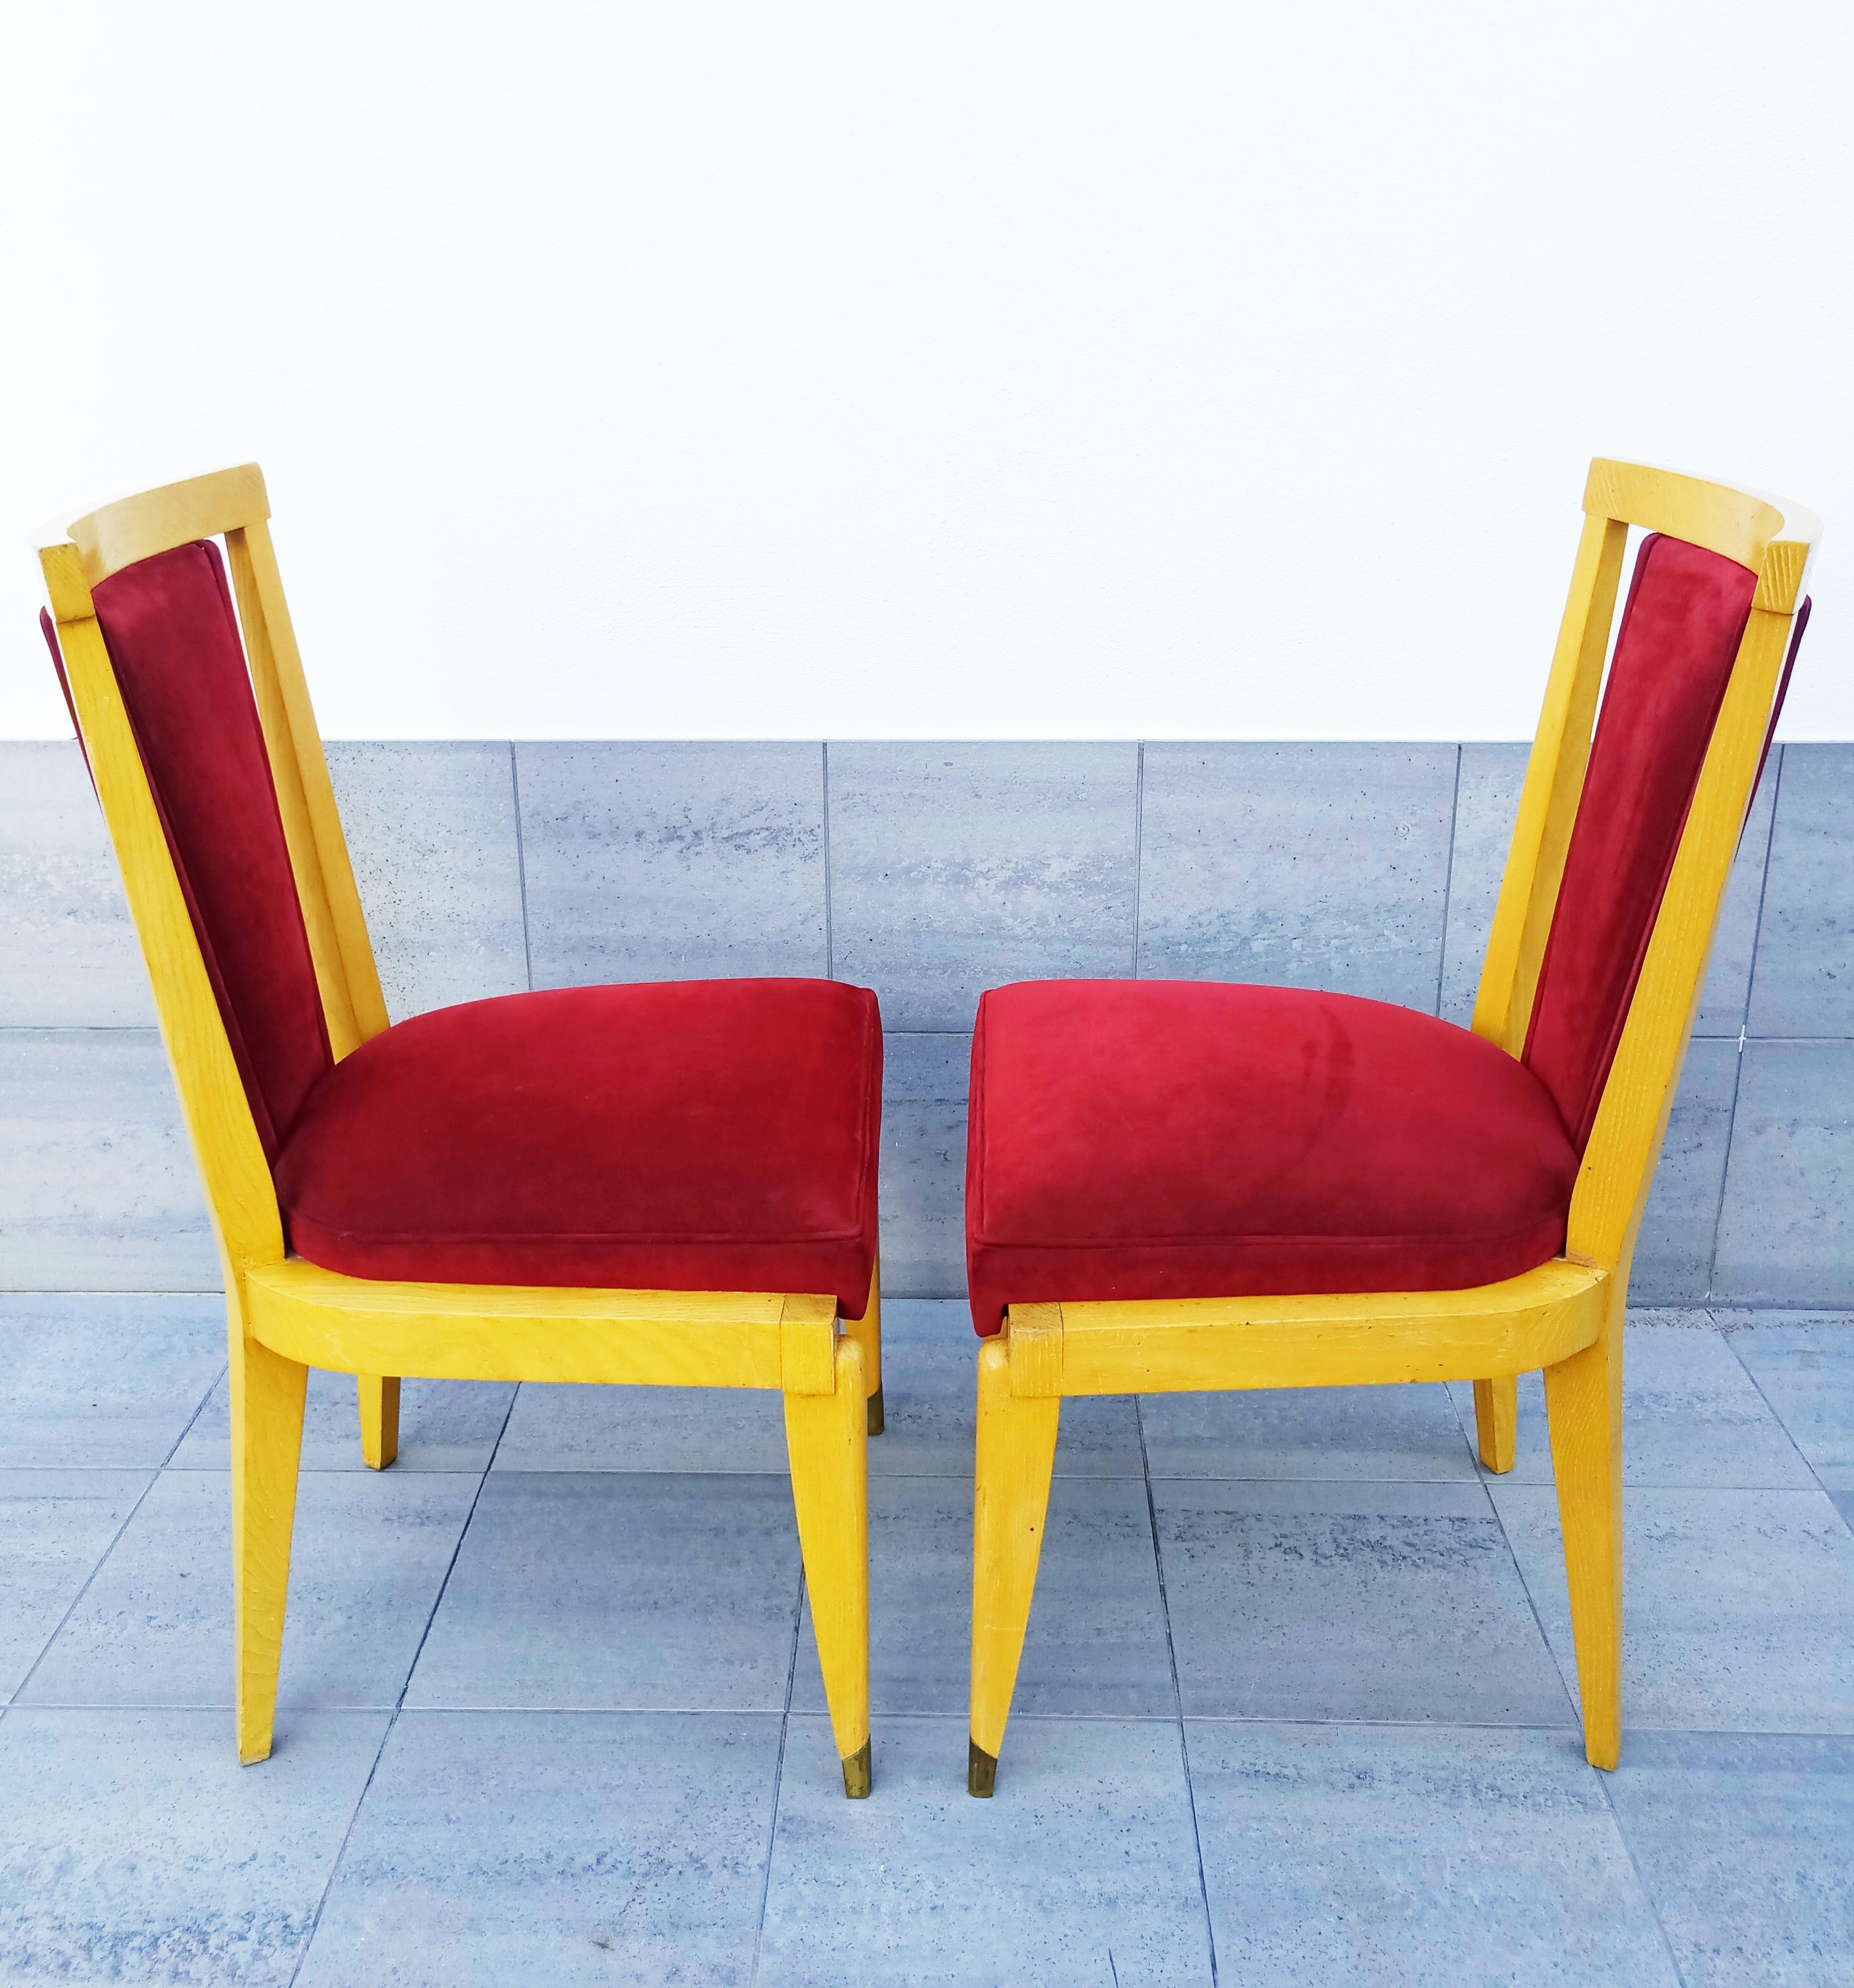 20th Century Rare Pair of André Arbus Chairs, France, 1940s For Sale